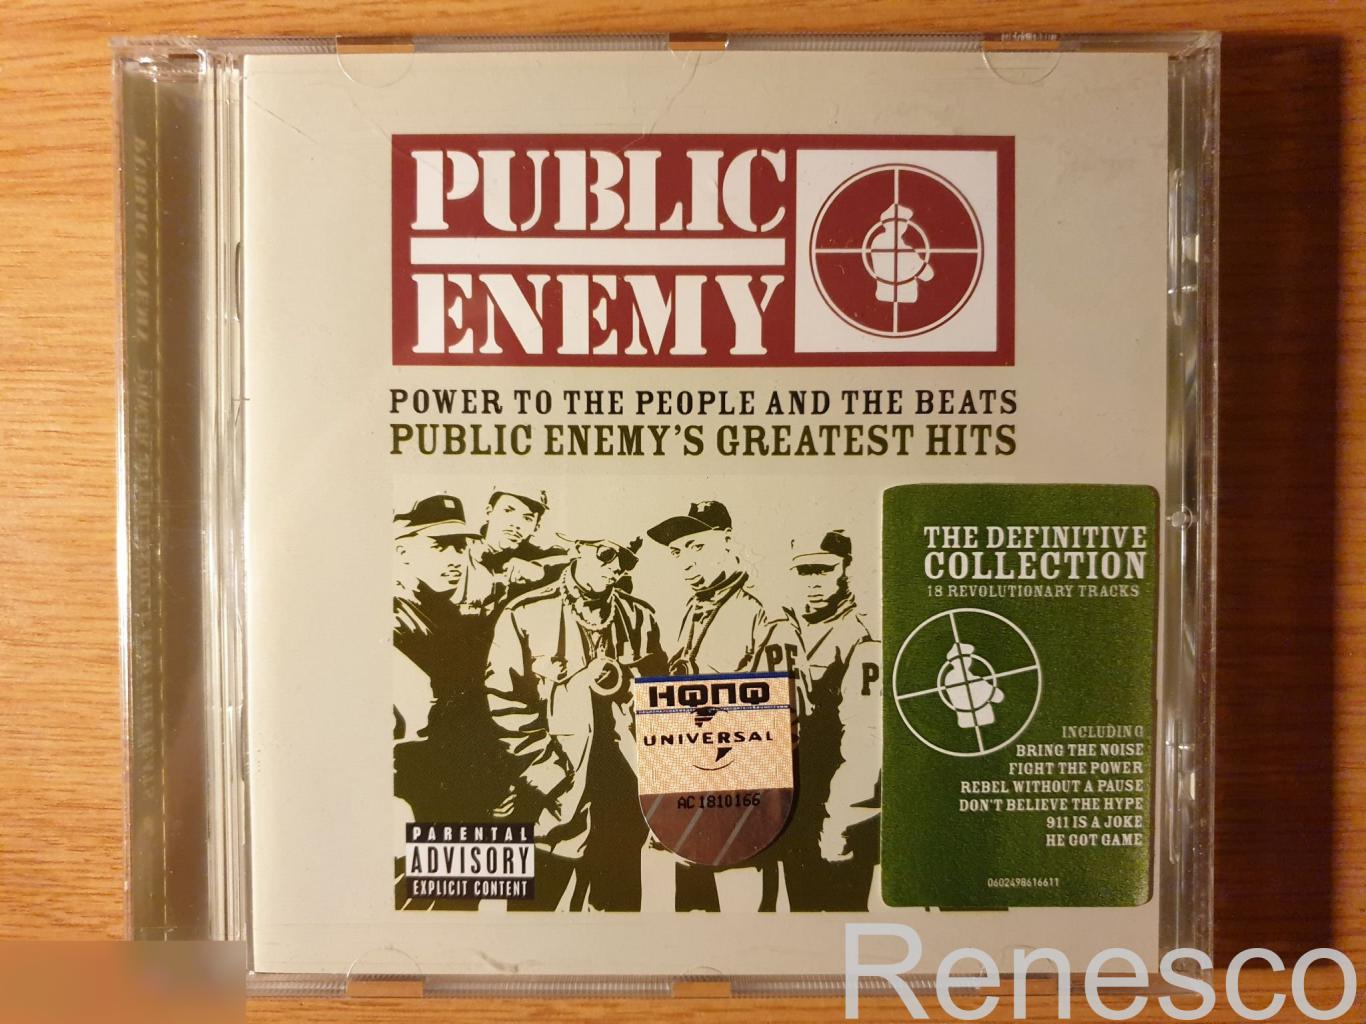 (CD) Public Enemy Power To The People And The Beats (Public Enemy's Greatest Hit